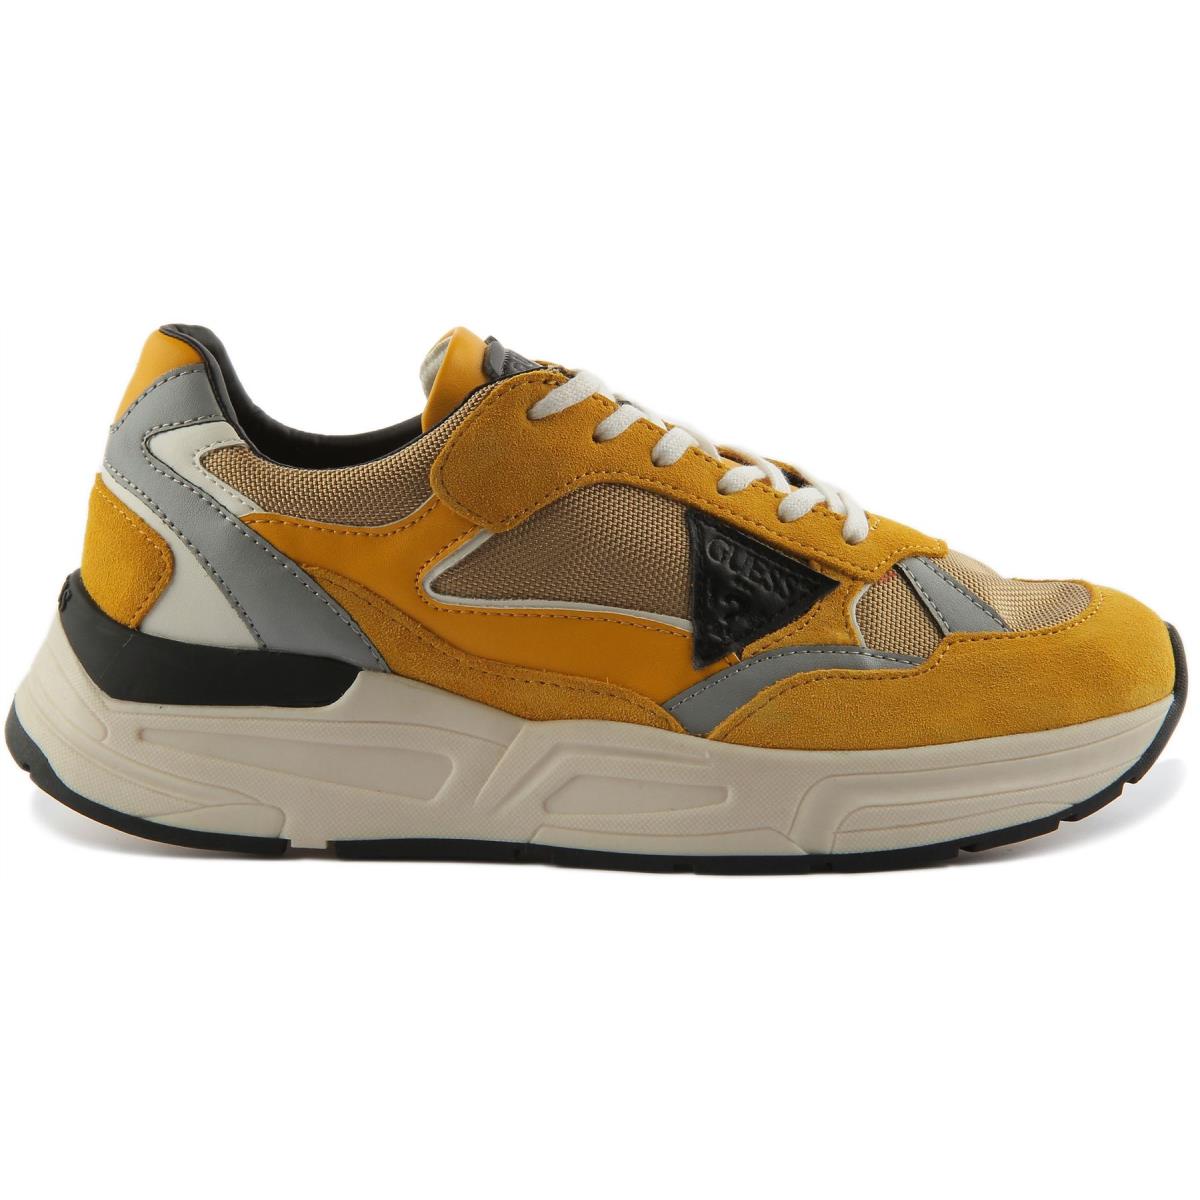 Guess Roria Embossed Side Logo Sneakers Yellow Mens US 7 - 13